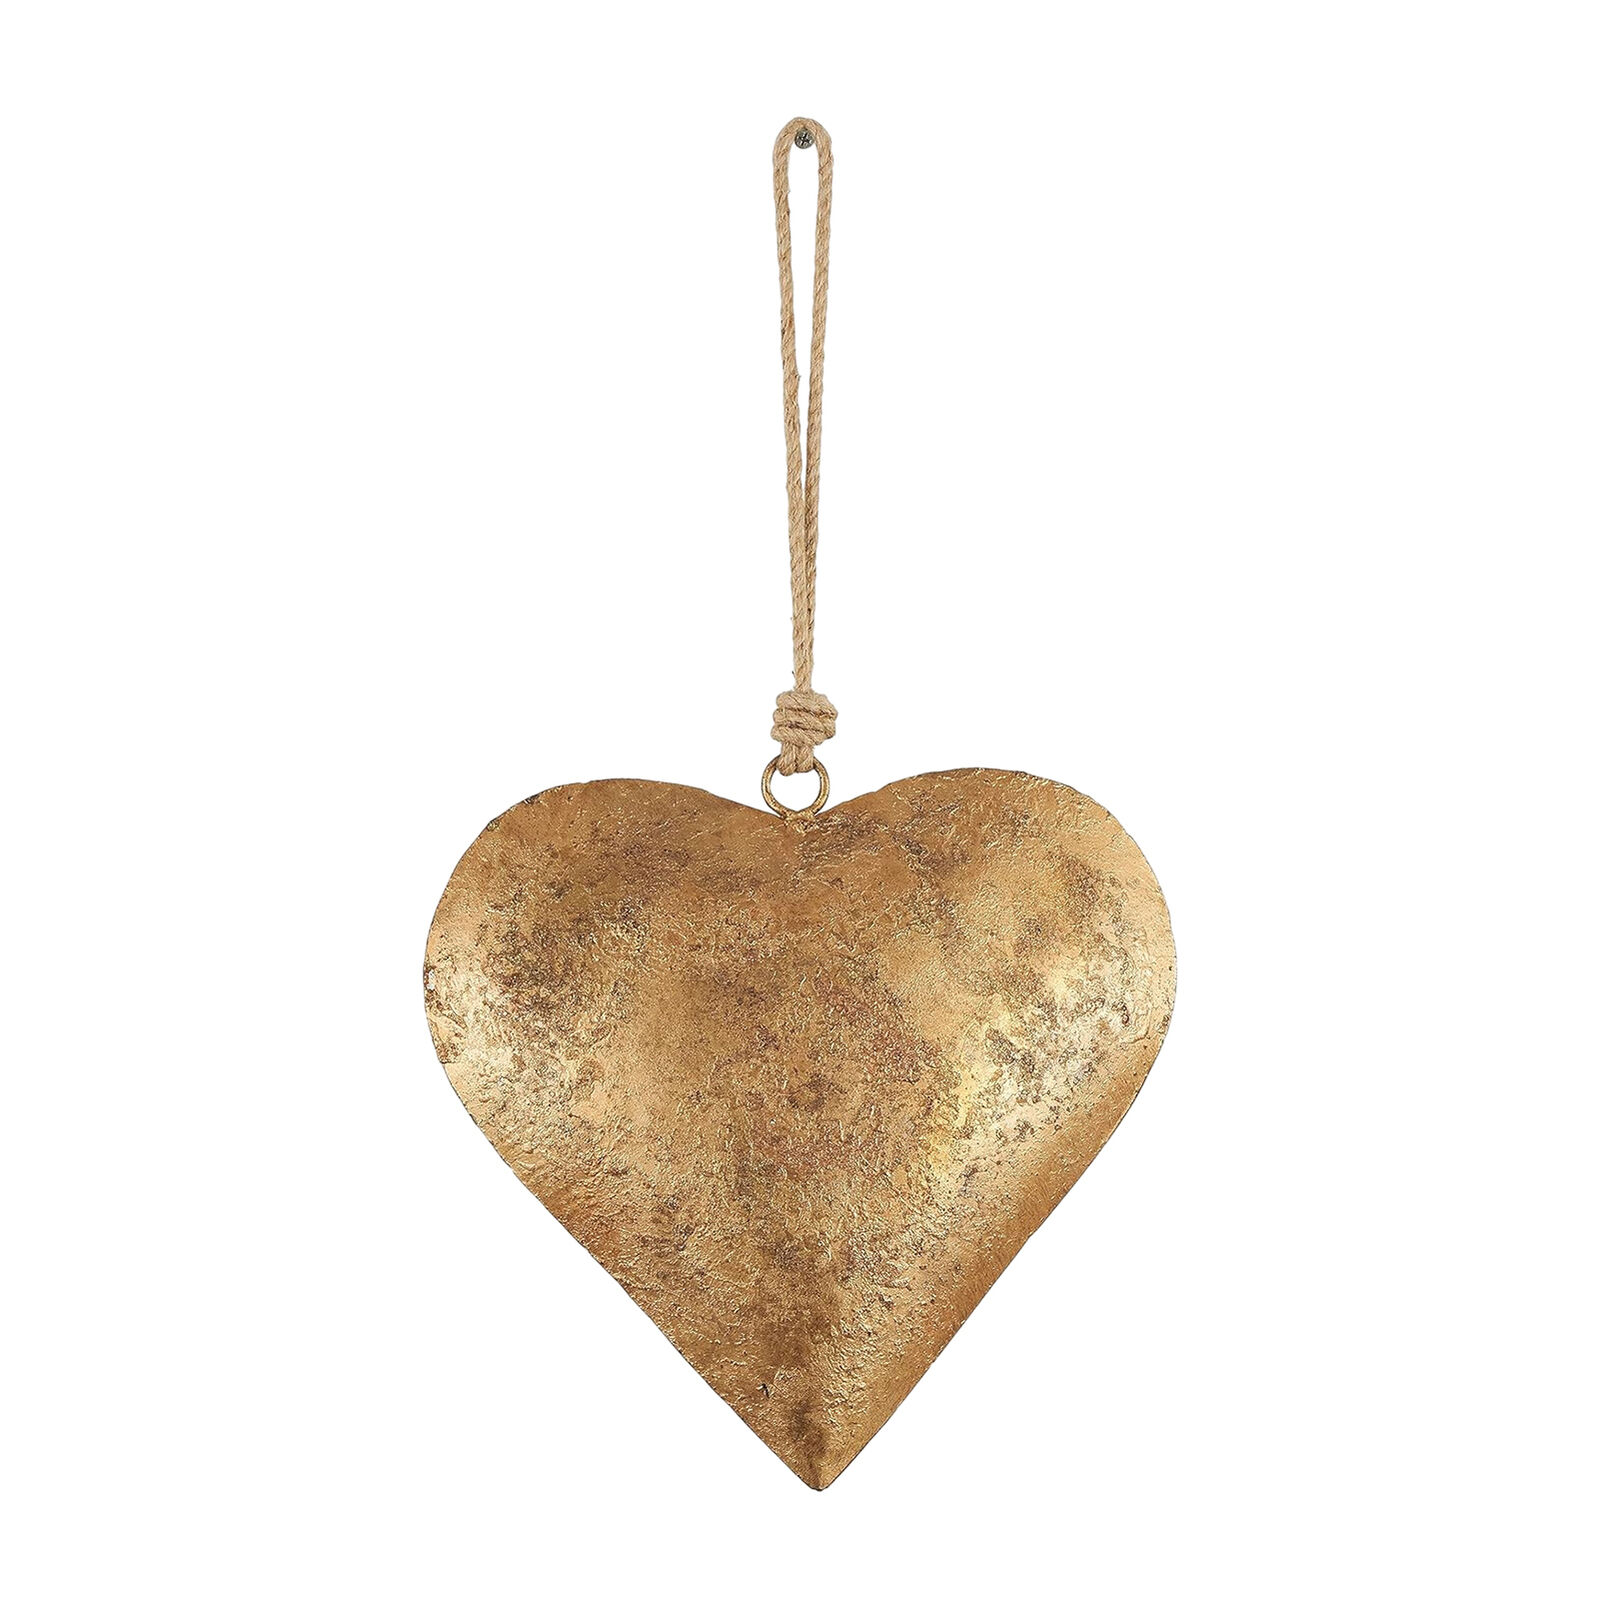 Rustic Metal Heart Bell Wall hanging Decor Heart-Shaped Iron Ornament